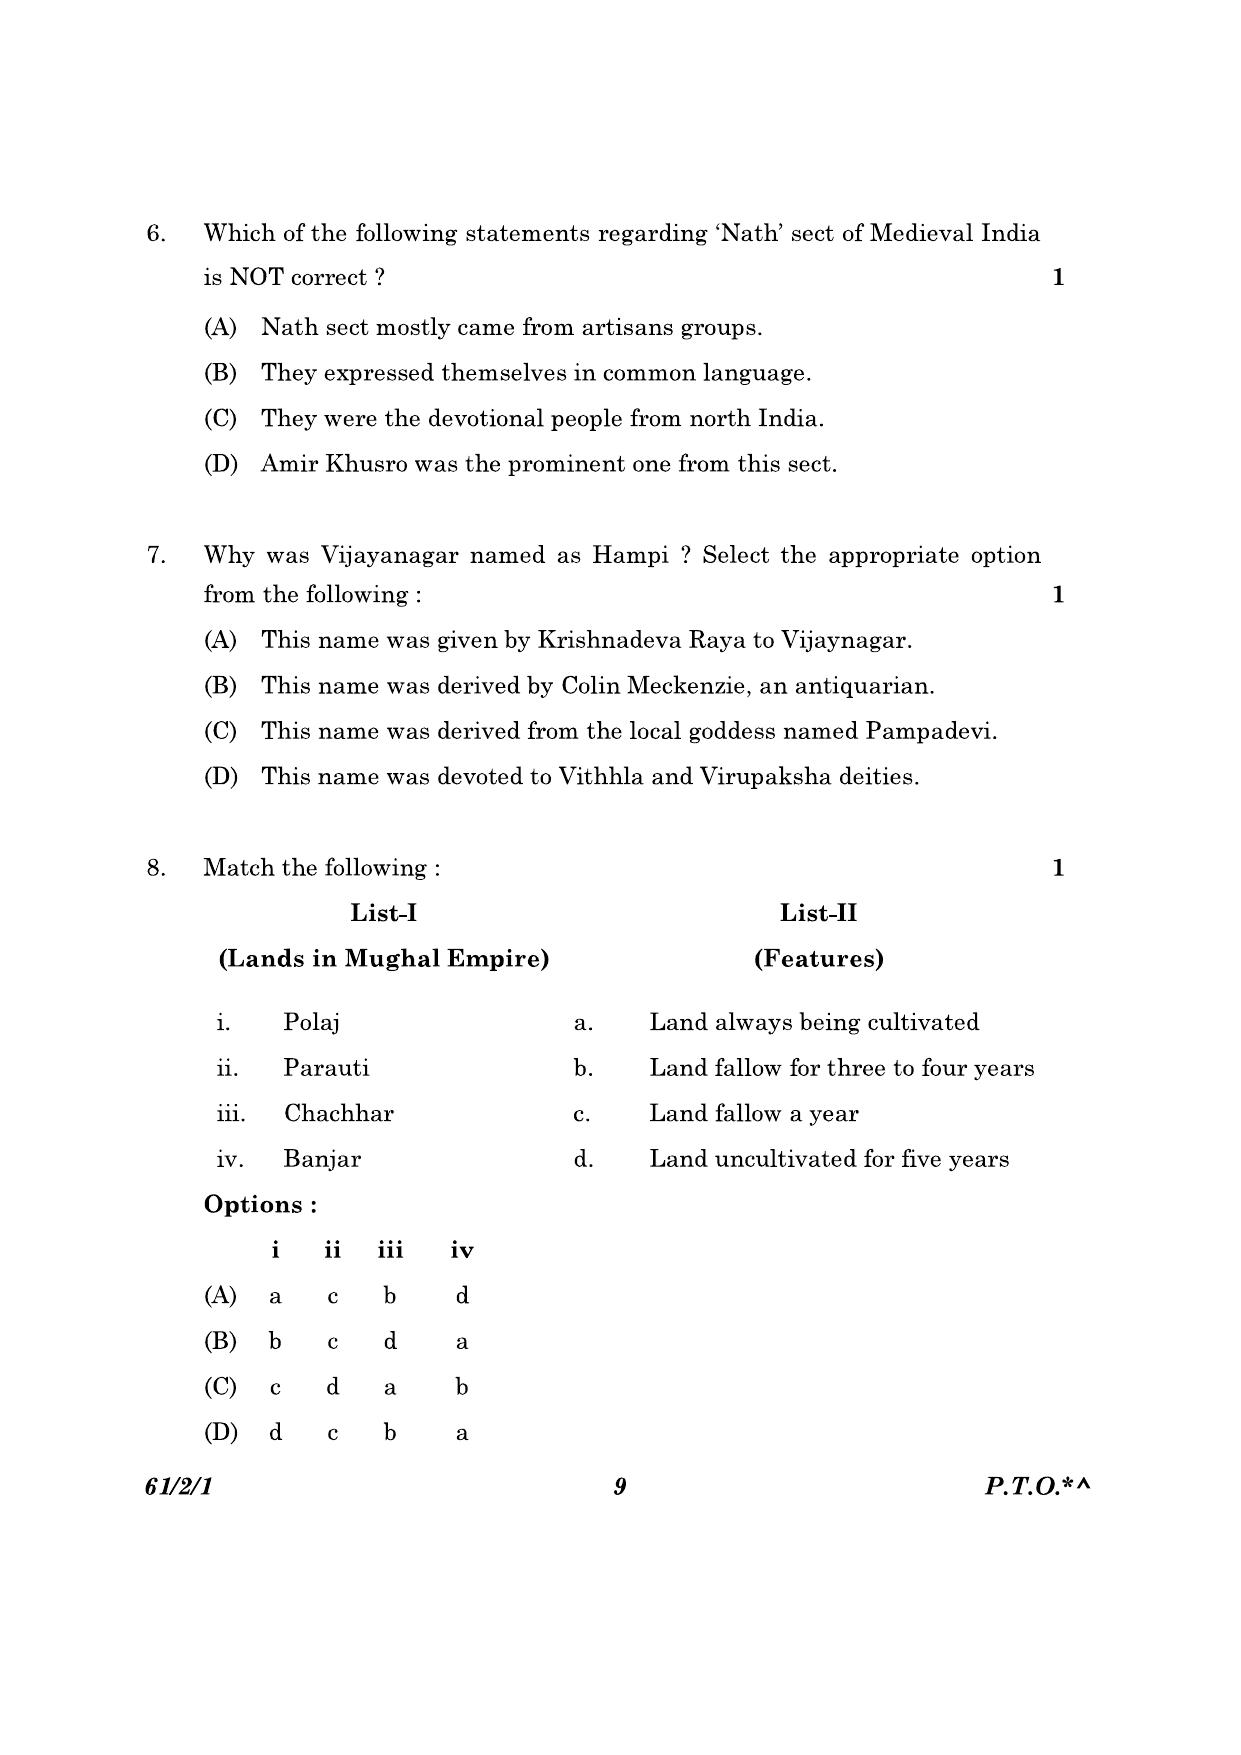 CBSE Class 12 61-2-1 History 2023 Question Paper - Page 9